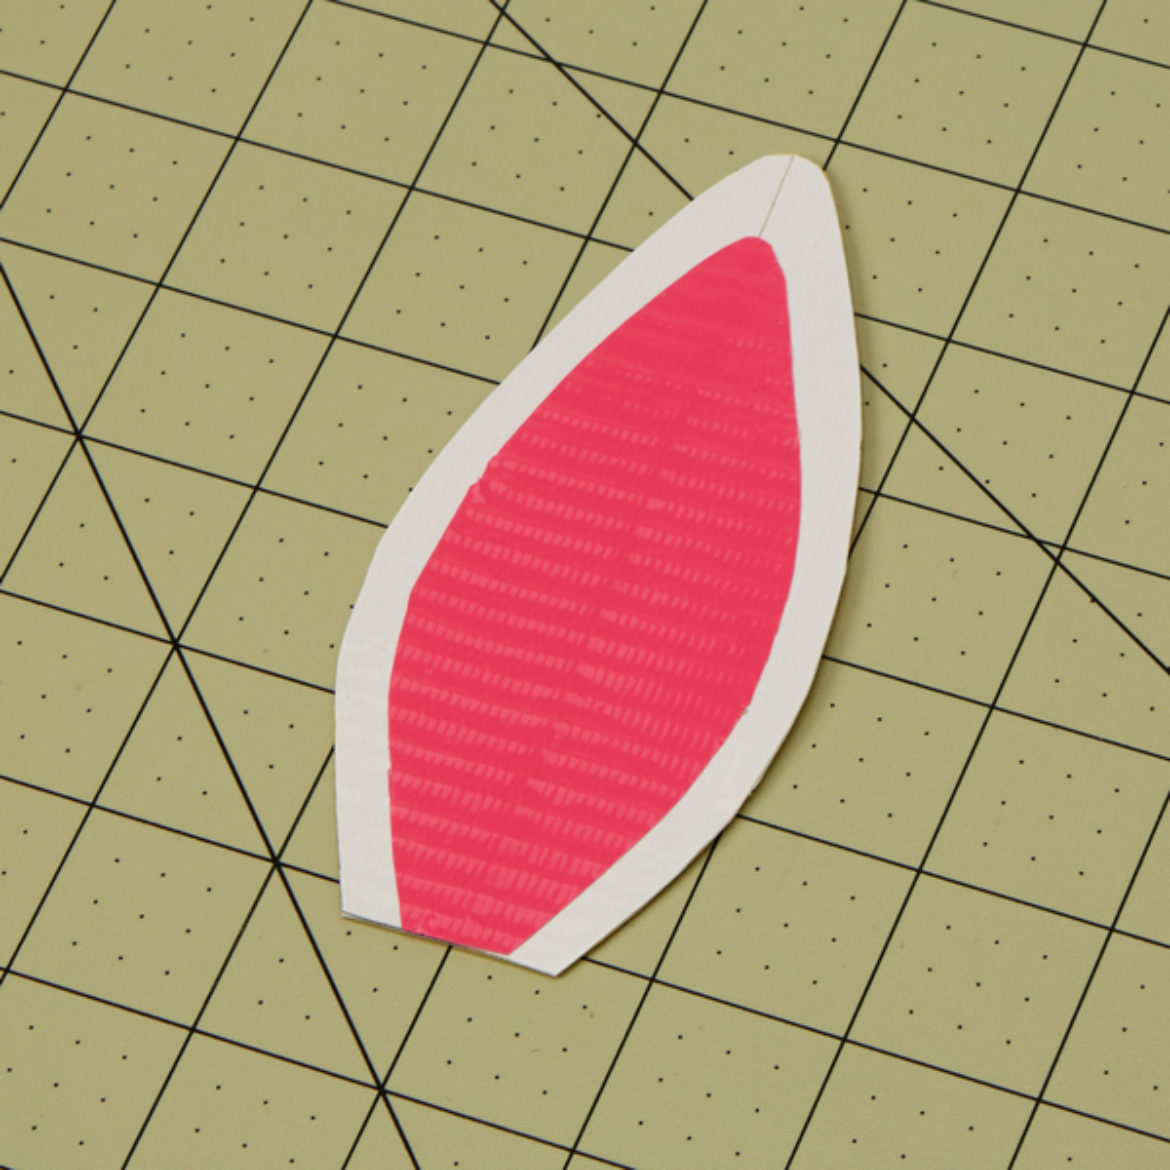 Pink Duck Tape cut to be slightly smaller than the previously made Duck Tape ears. Pink Duck Tape ear shape placed inside the larger white ears